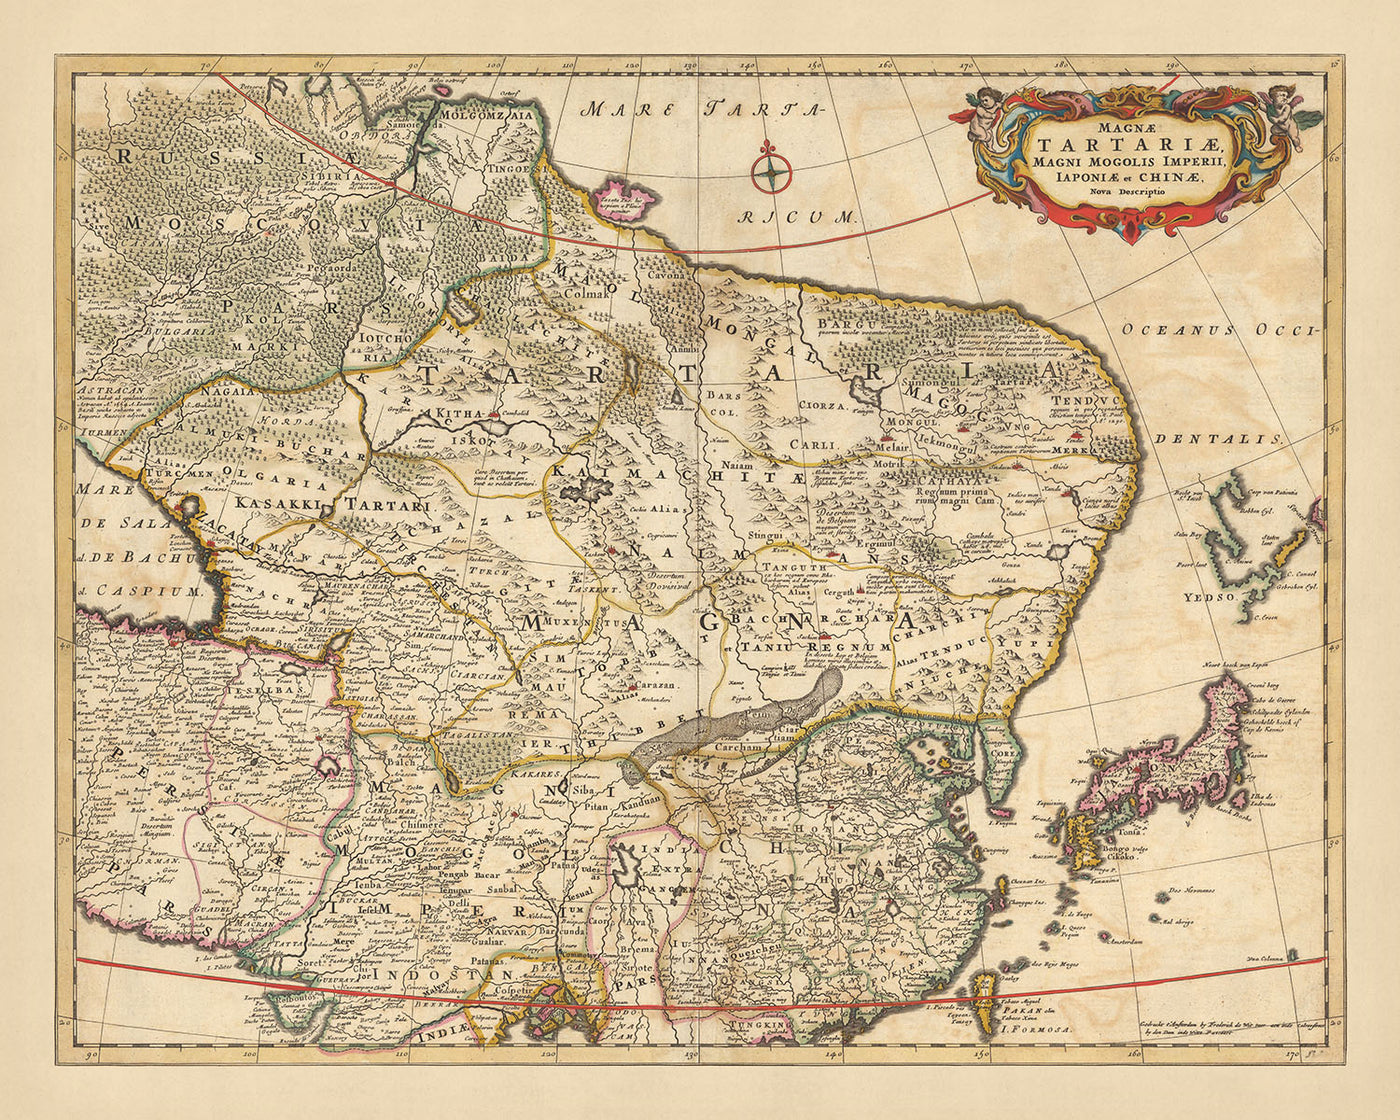 Old Map of Greater Tartary, the Great Mogul's Empire, Japan, and China by Visscher, 1690: East Asia, Central Asia, Beijing, Tokyo, Himalayas